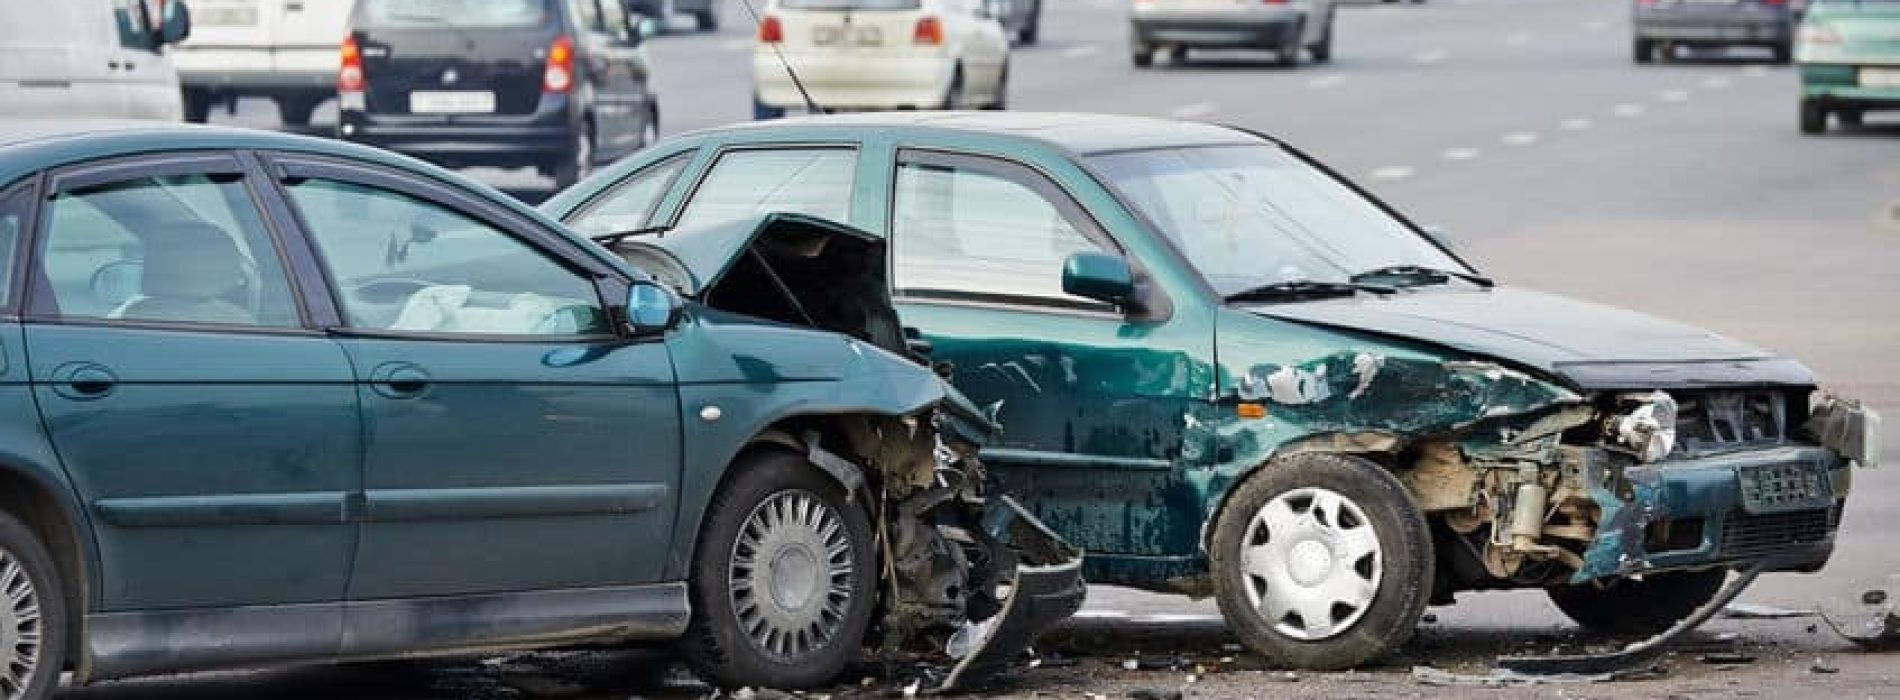 Hiring a Right Car Accident Lawyer in Michigan